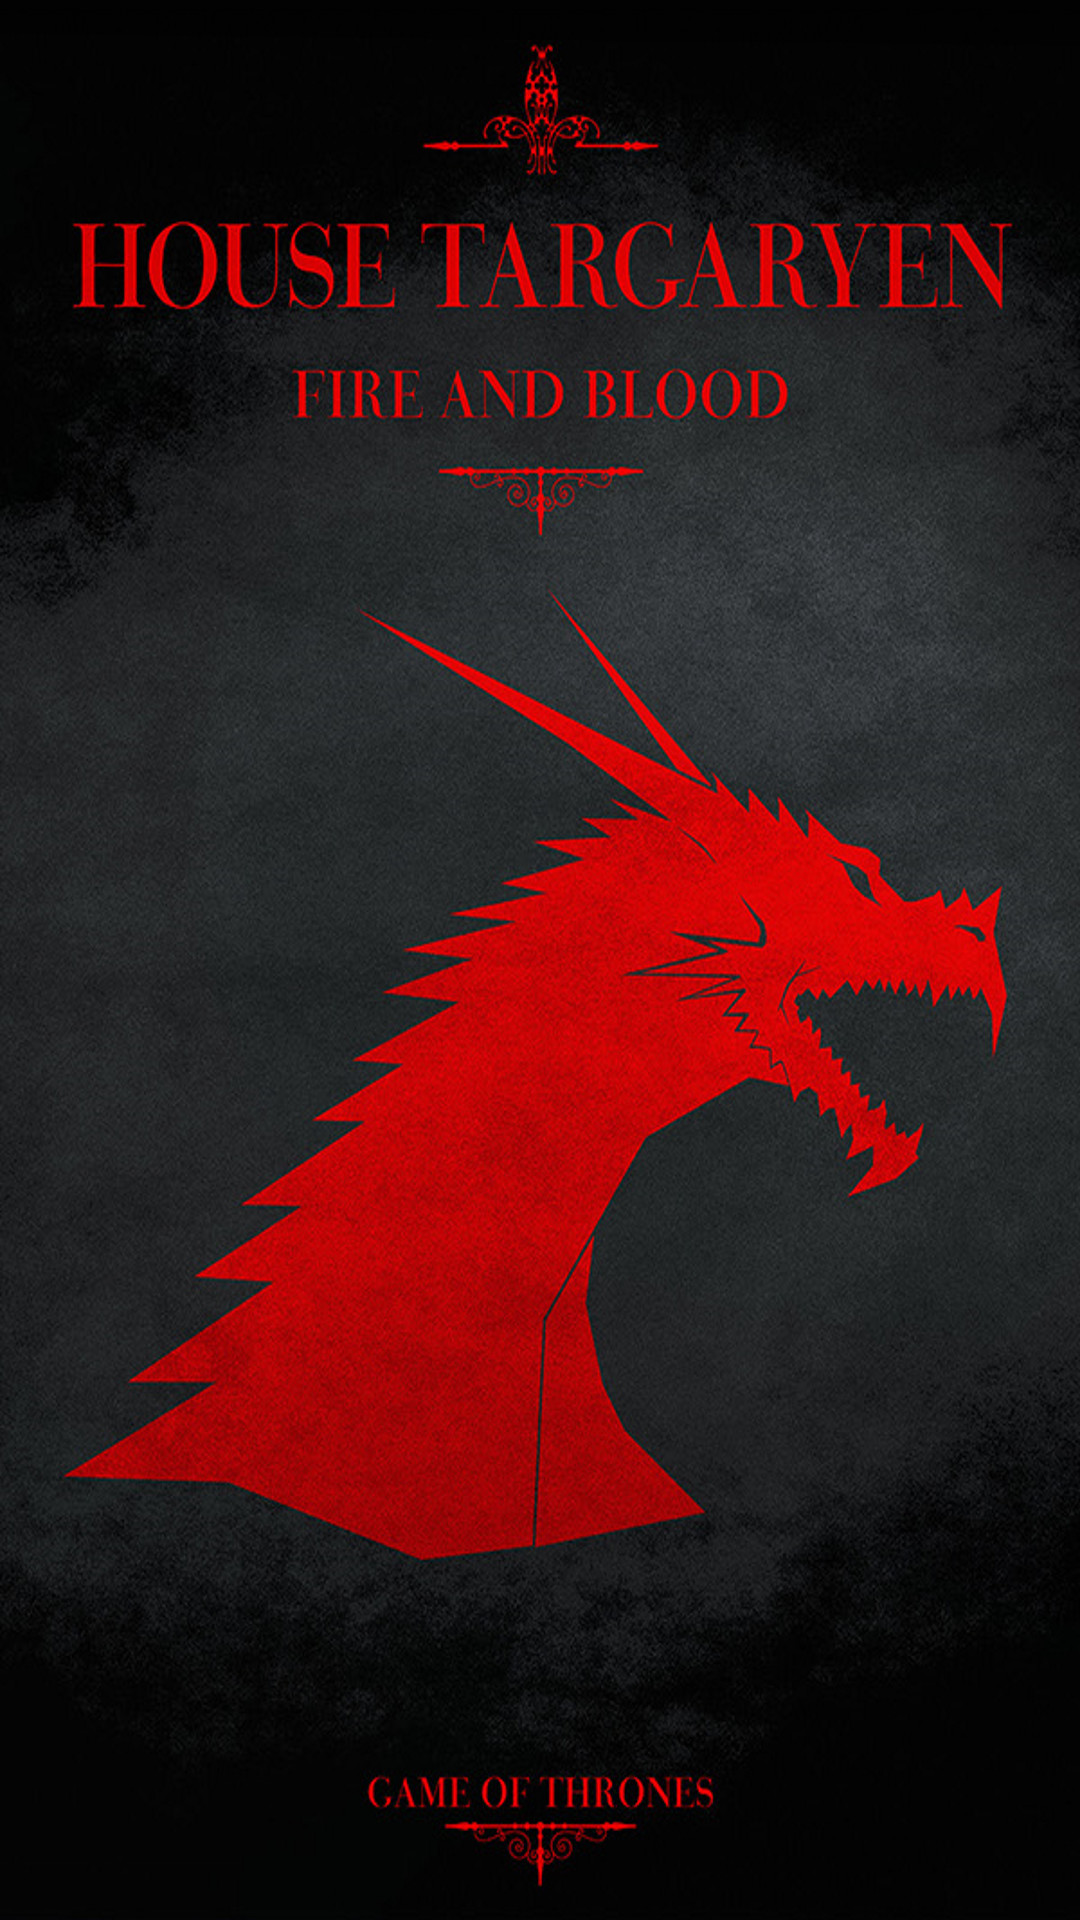 wallpaper for phone phone wallpapers game of thrones wallpaper game of  thrones house stark house lannister